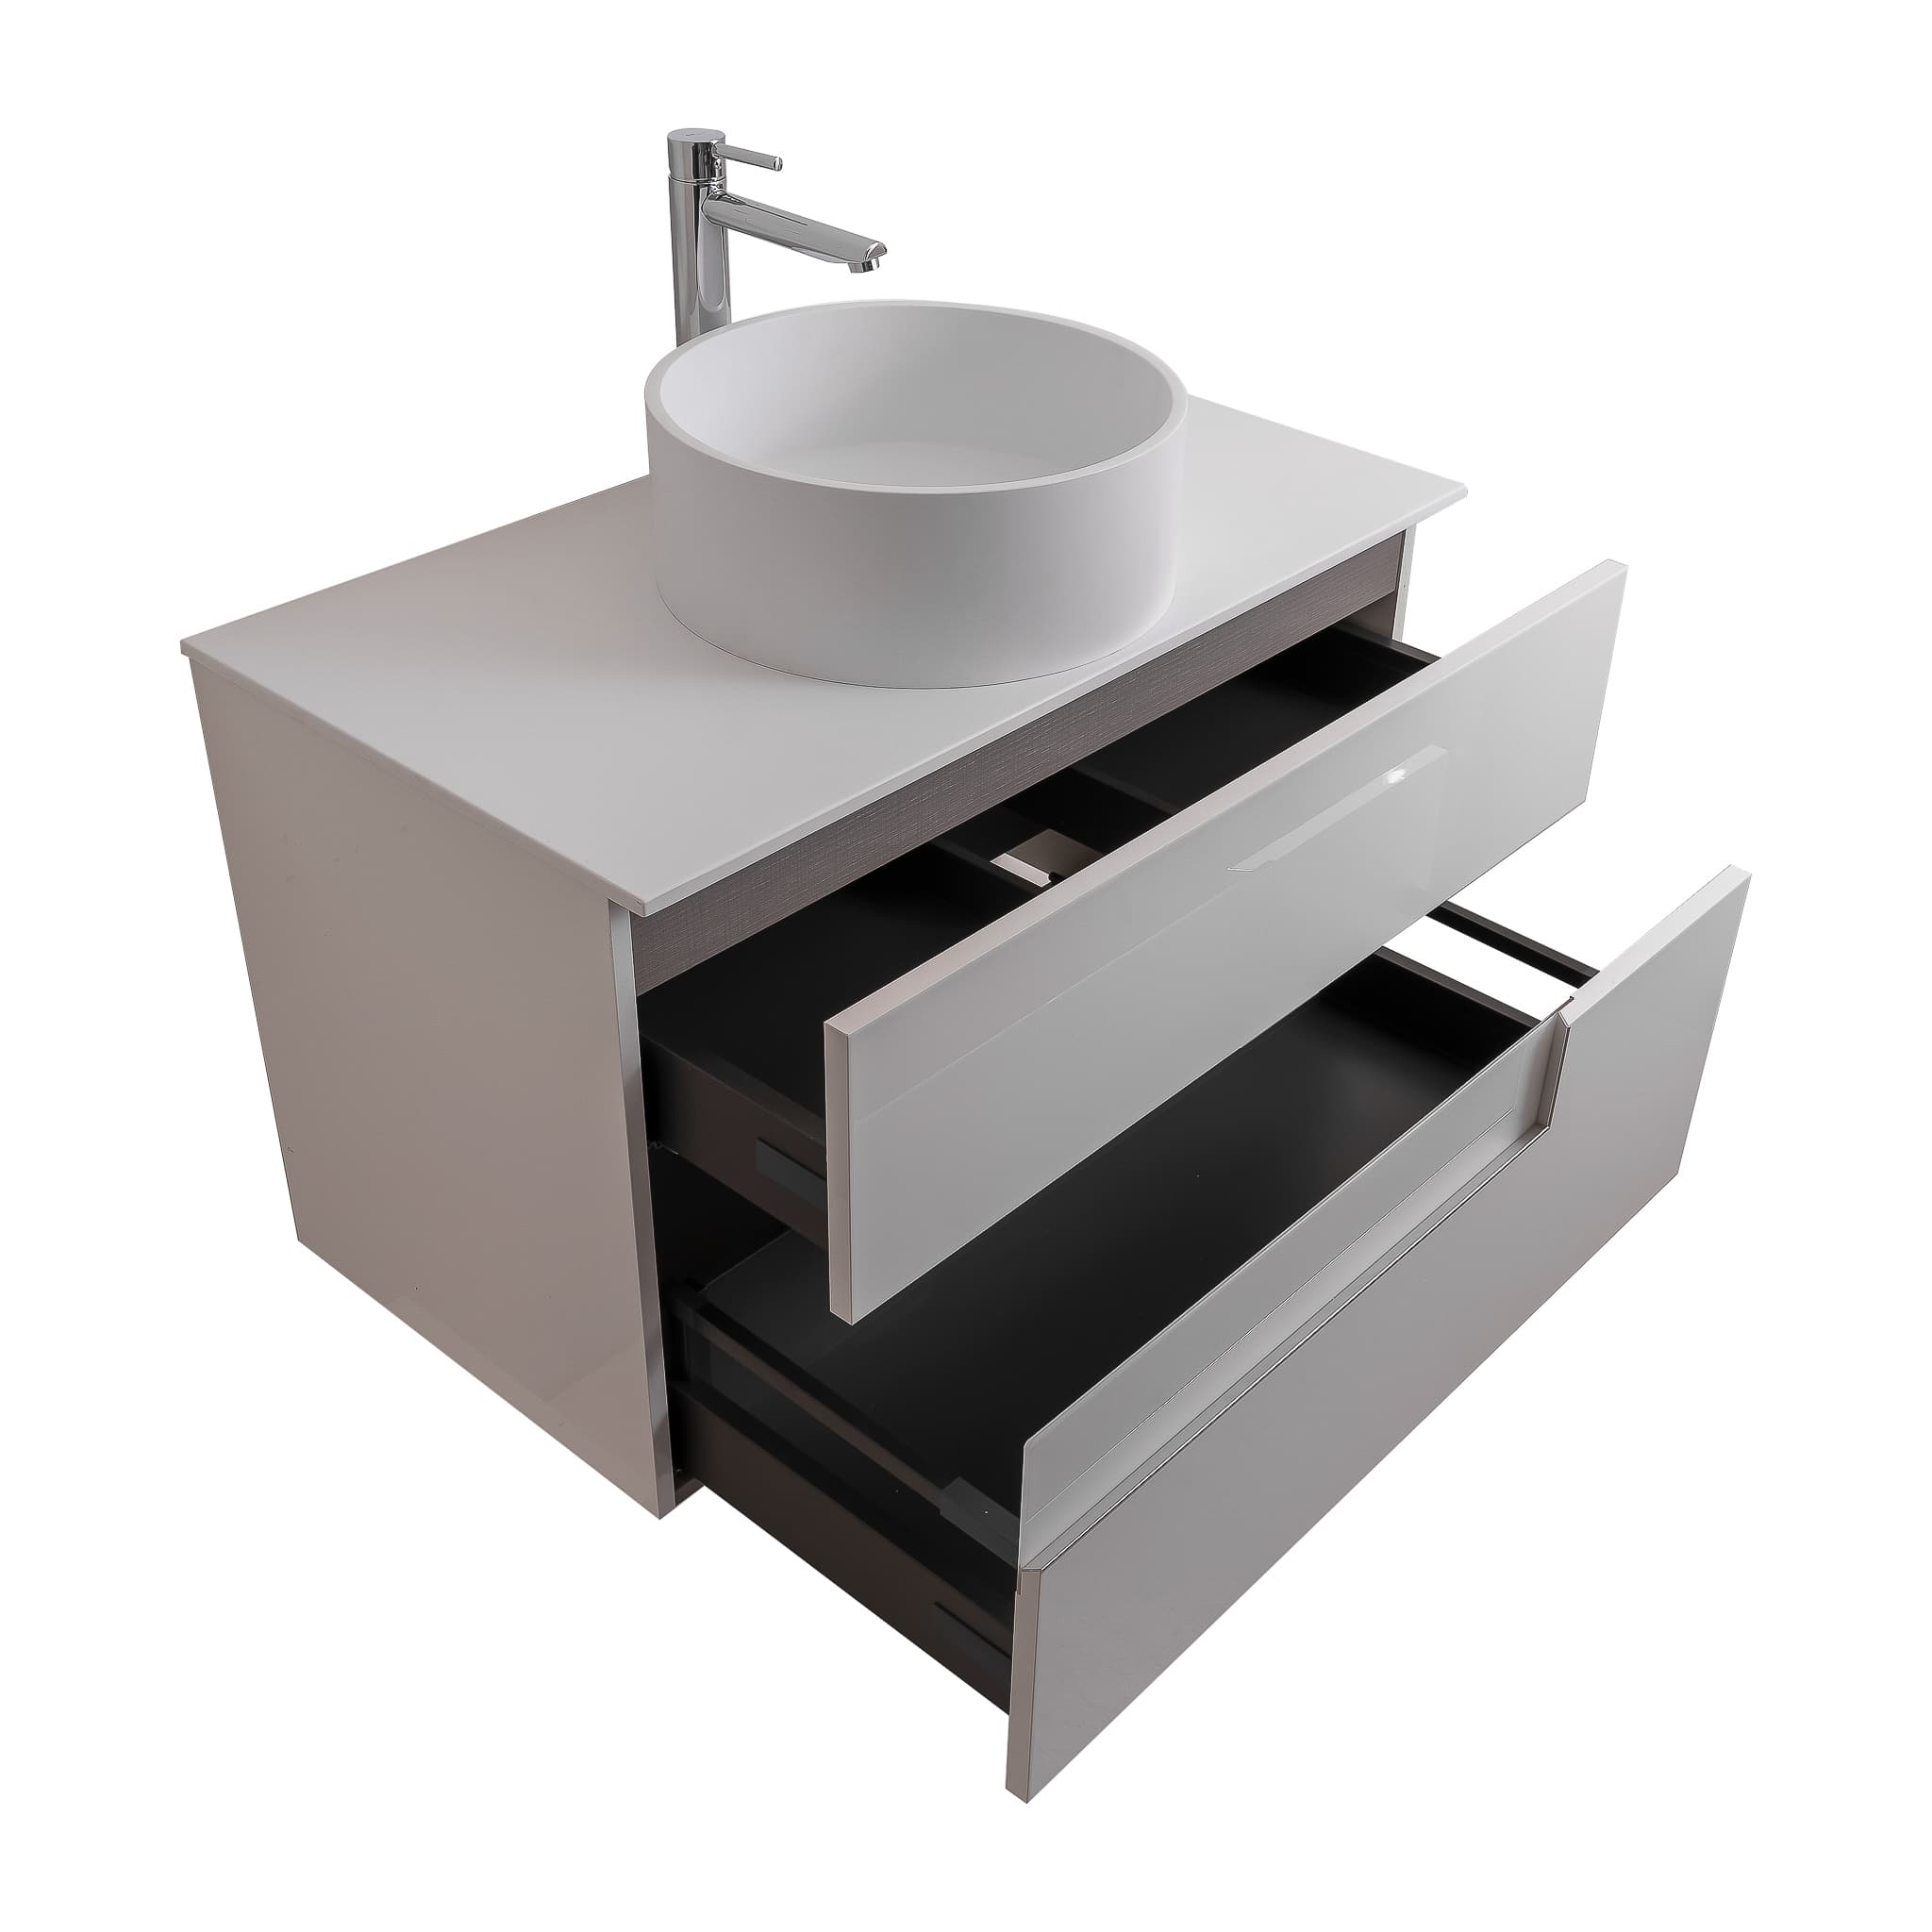 Vision 39.5 White High Gloss Cabinet, Solid Surface Flat White Counter And Round Solid Surface White Basin 1386, Wall Mounted Modern Vanity Set